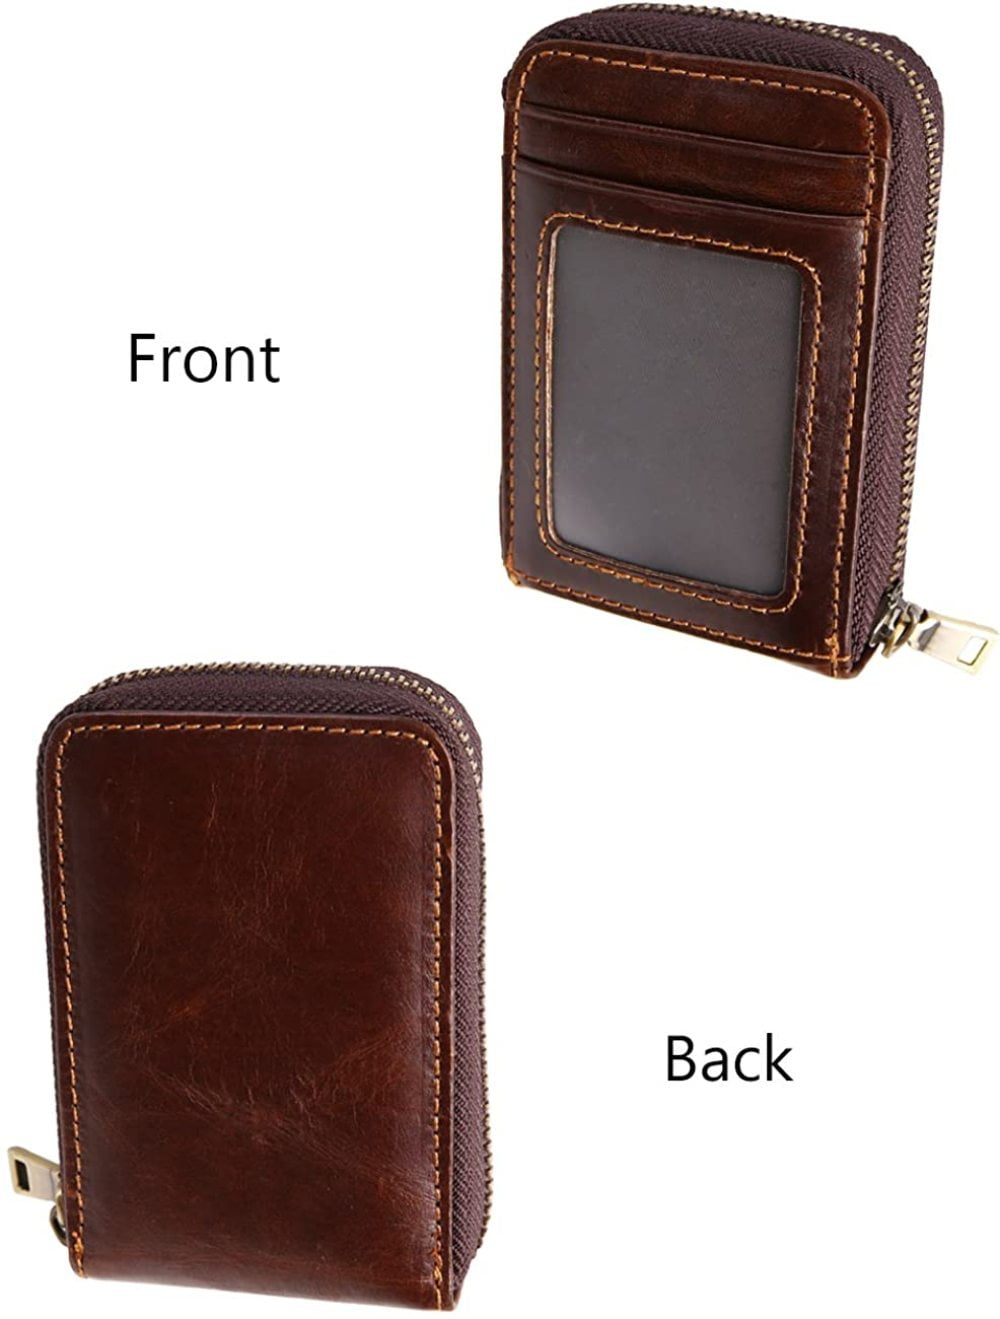 Brown iSuperb RFID Blocking Card Holder Wallet Vintage Genuine Leather Card Purse Zipper Closure Oil Wax Credit Card Small Wallet with ID Window for Men and Women 2.95x4.52x1.37 inch 